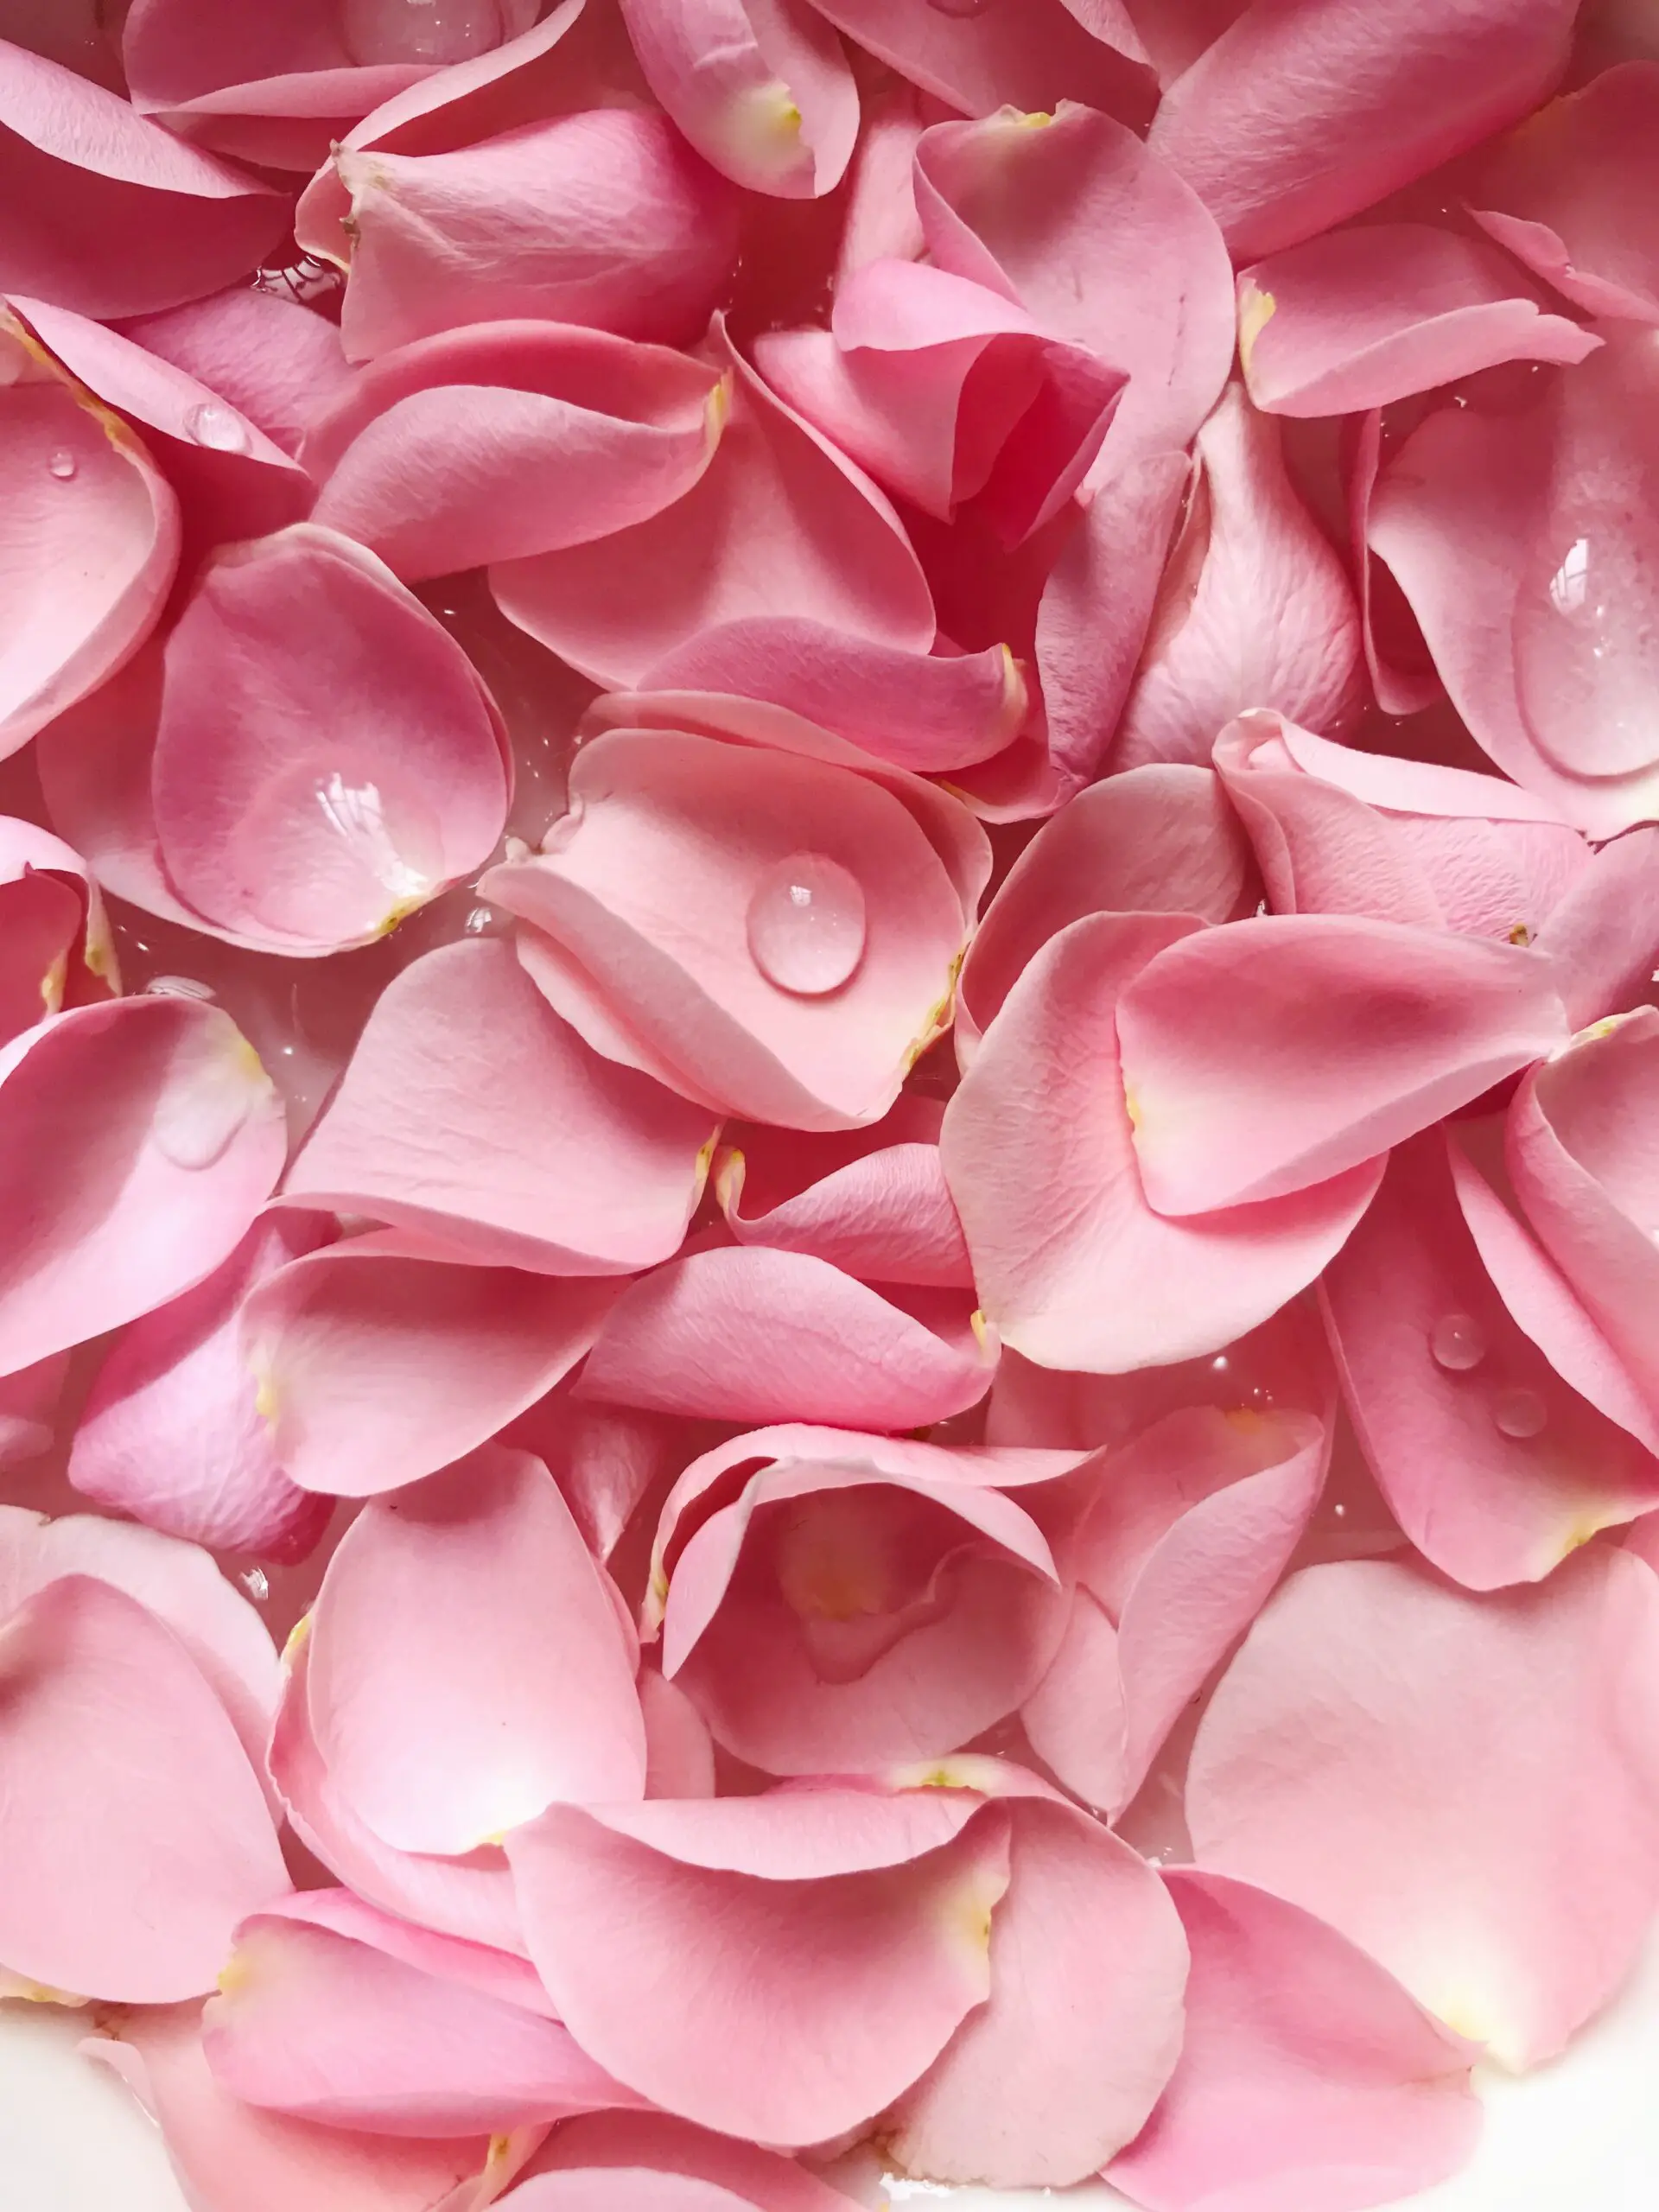 rose petals can add to the mood or rose petals can help hype you up